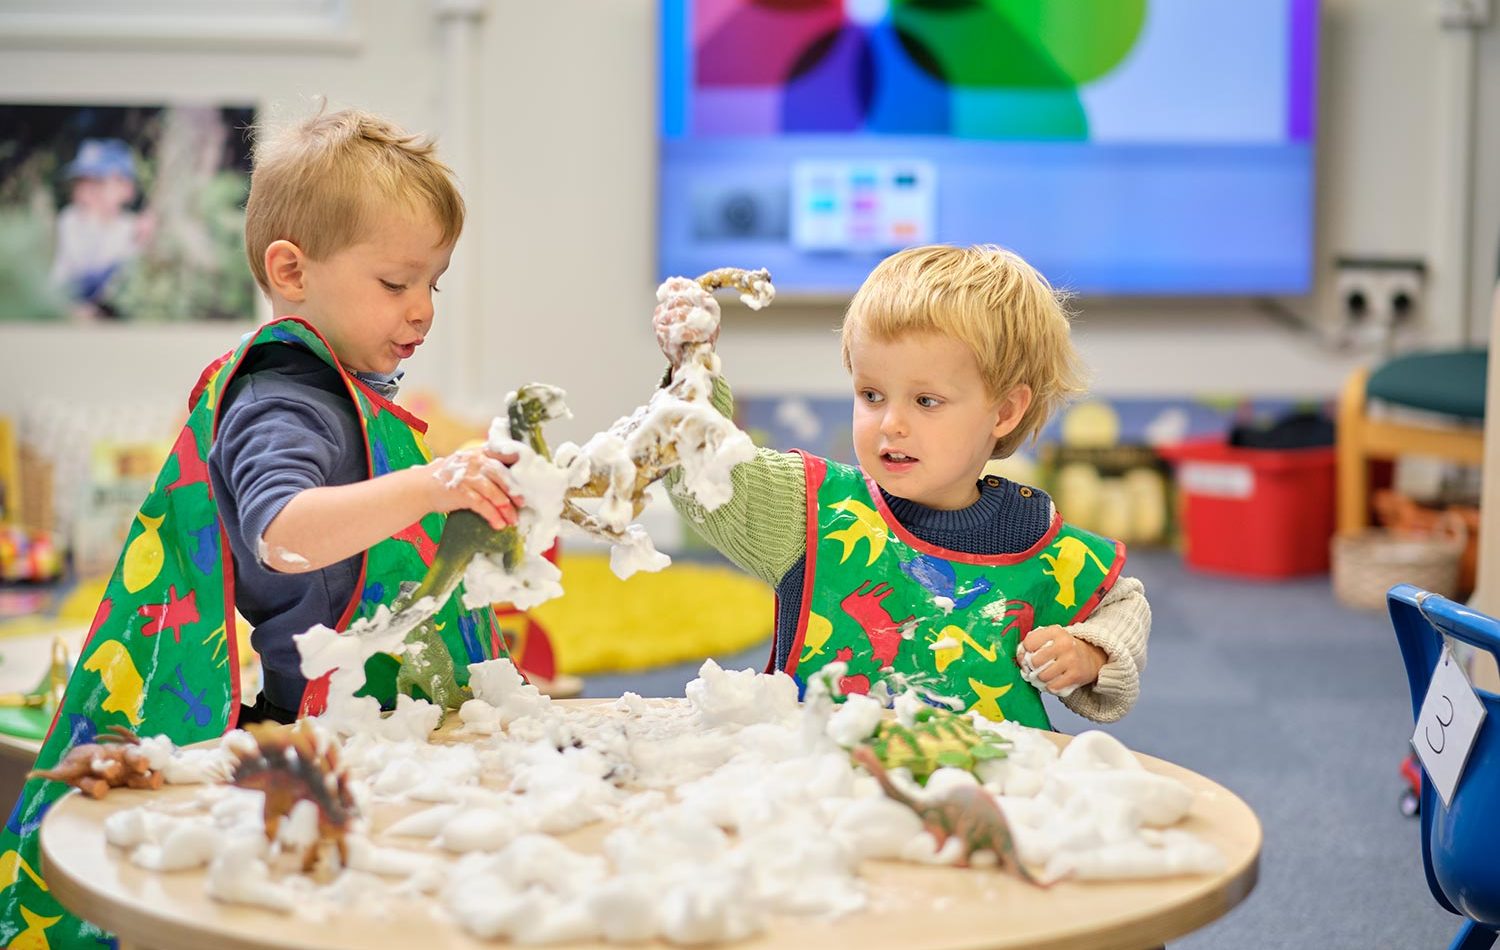 Sensory activities encourage the children to think about different textures, colour and materials